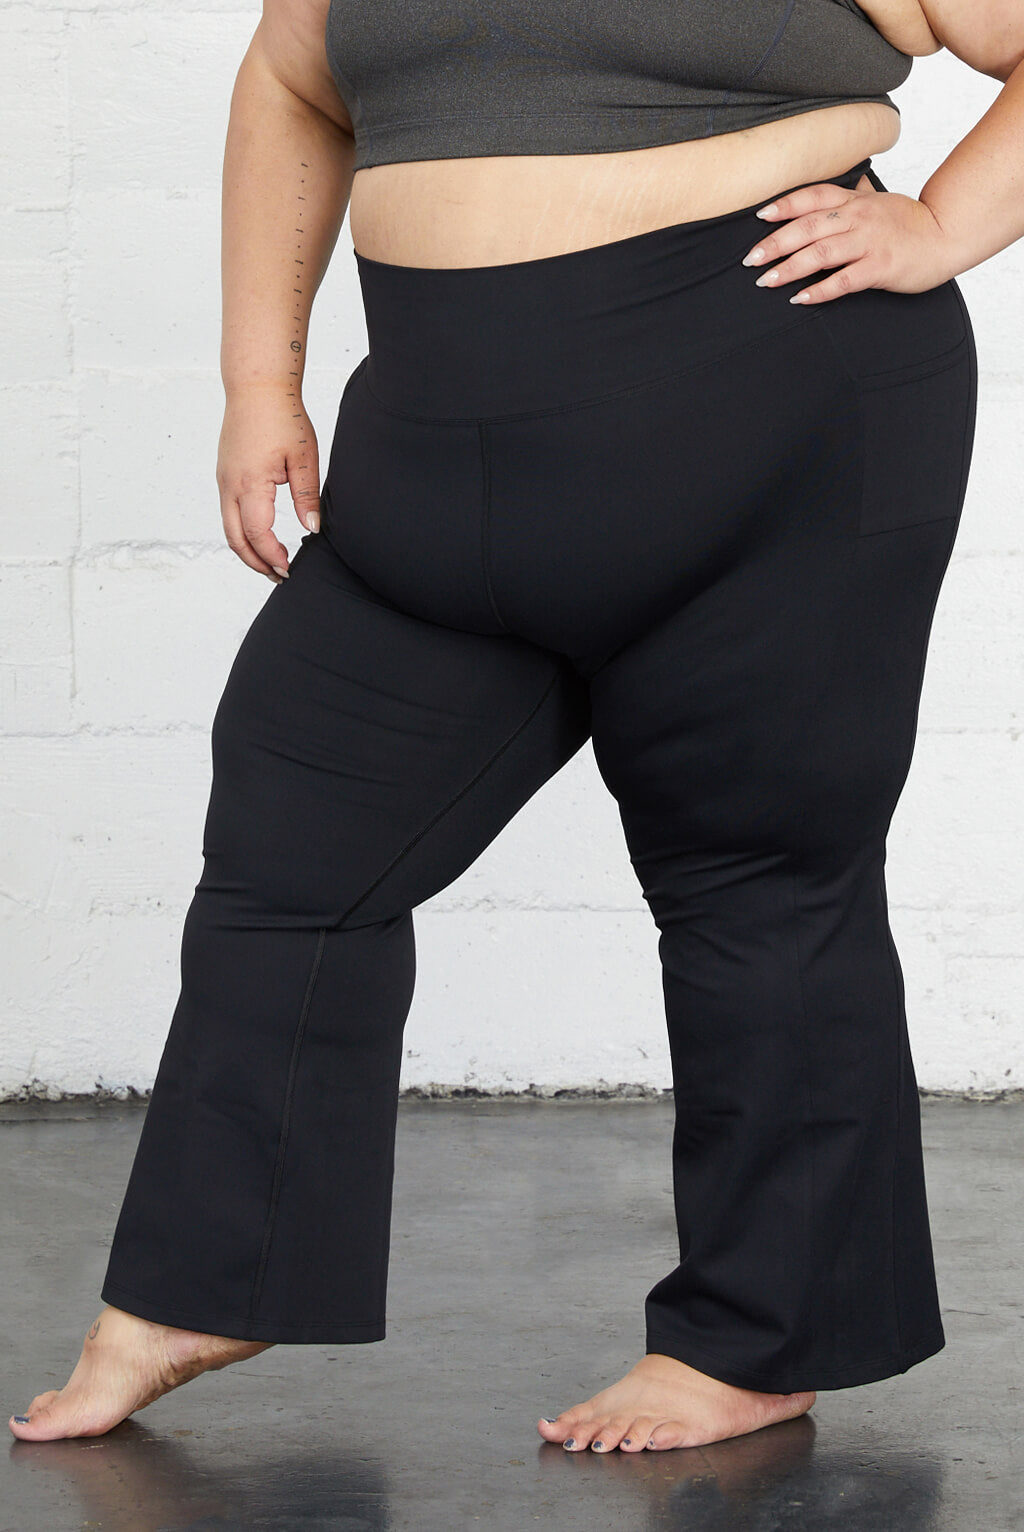  PINSPARK Black Flare Leggings for Women with Pockets